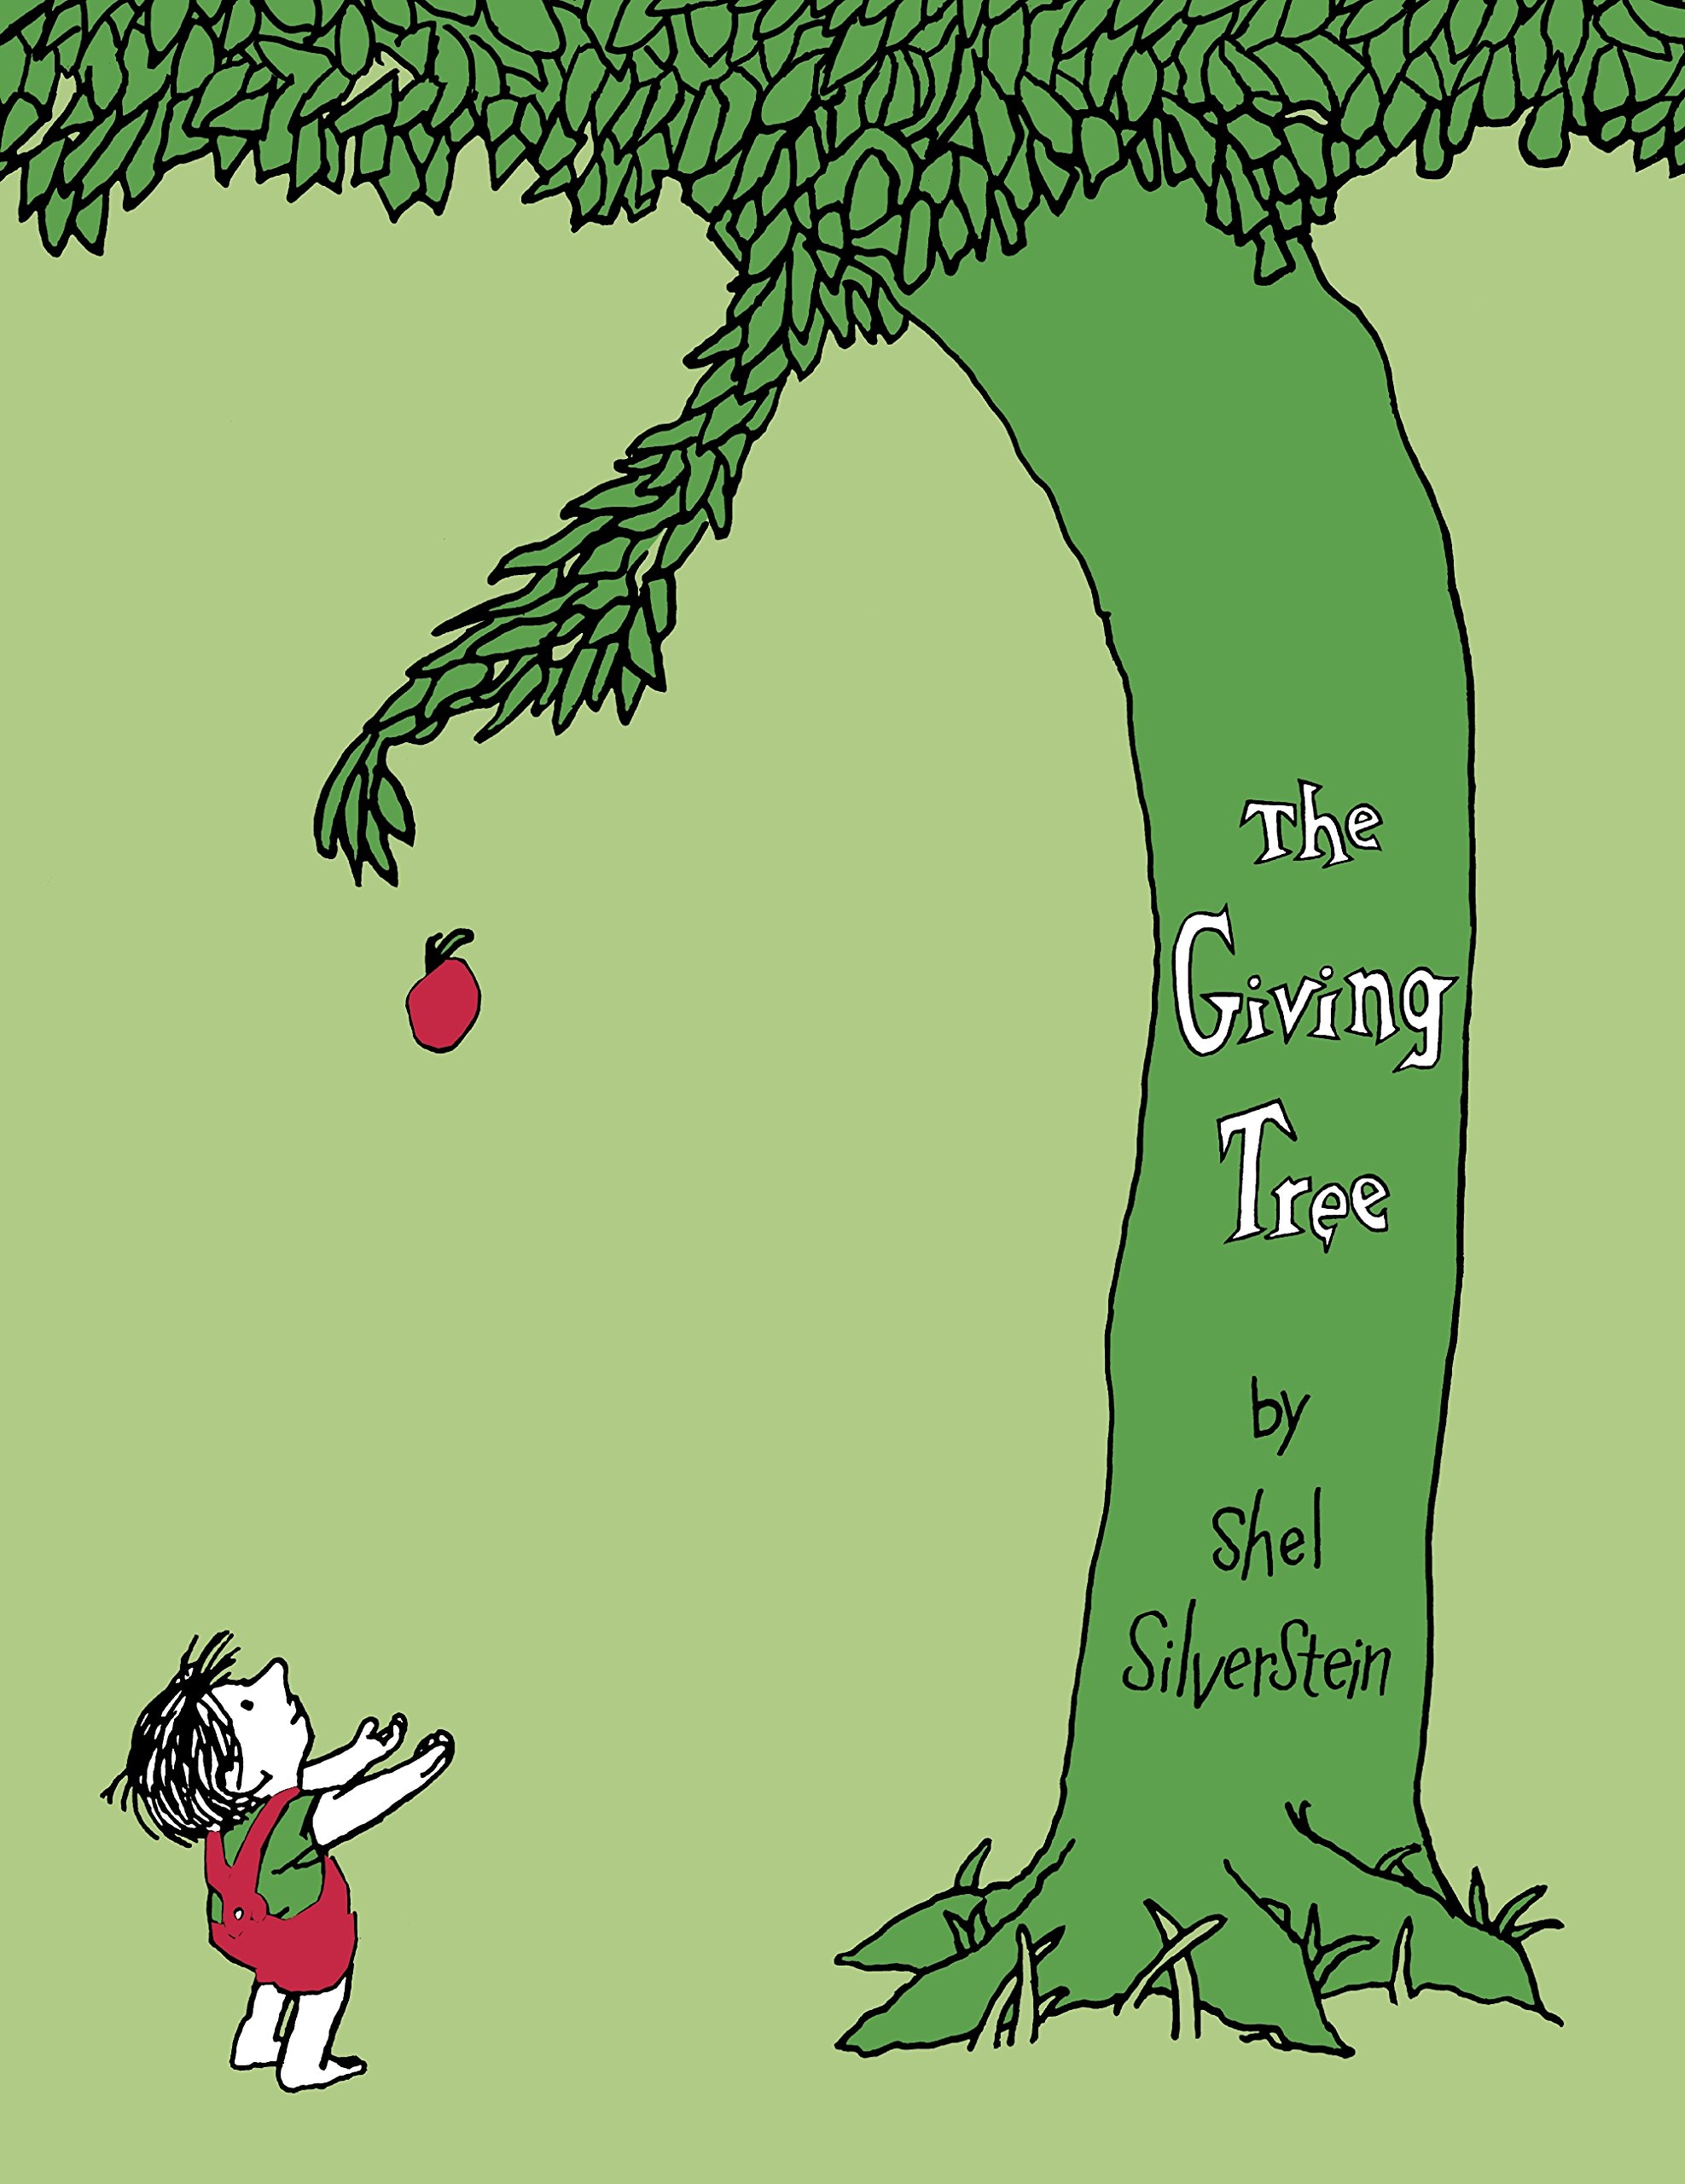 5. 'The Giving Tree'